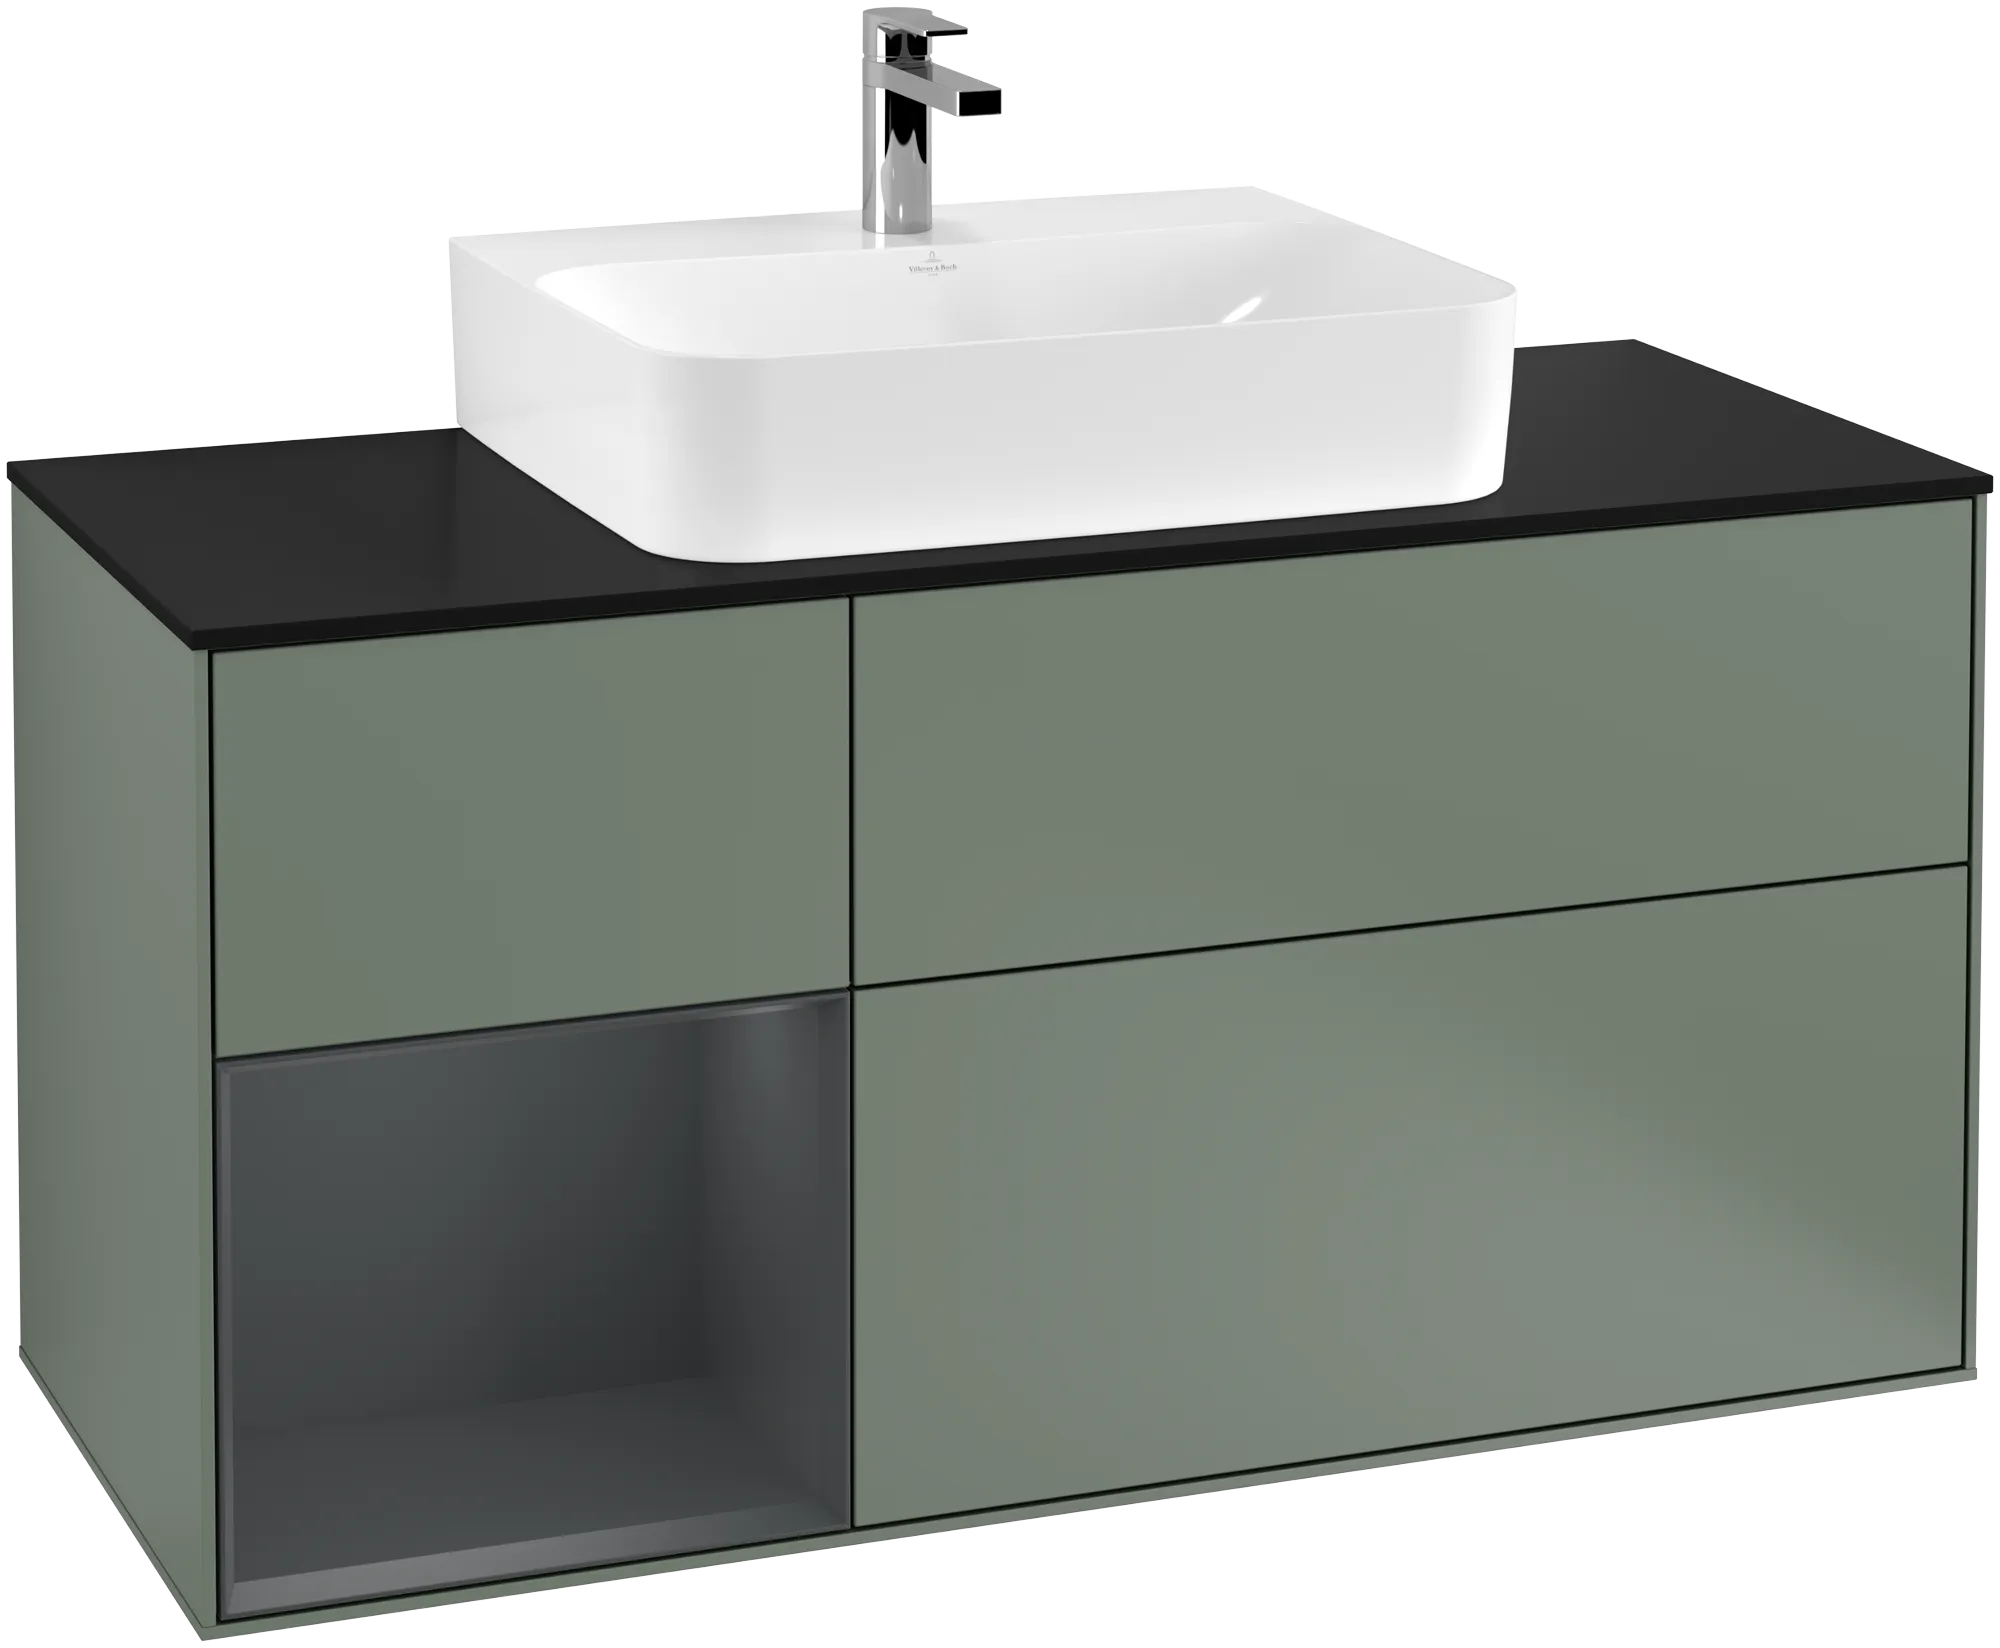 Picture of VILLEROY BOCH Finion Vanity unit, with lighting, 3 pull-out compartments, 1200 x 603 x 501 mm, Olive Matt Lacquer / Midnight Blue Matt Lacquer / Glass Black Matt #G162HGGM